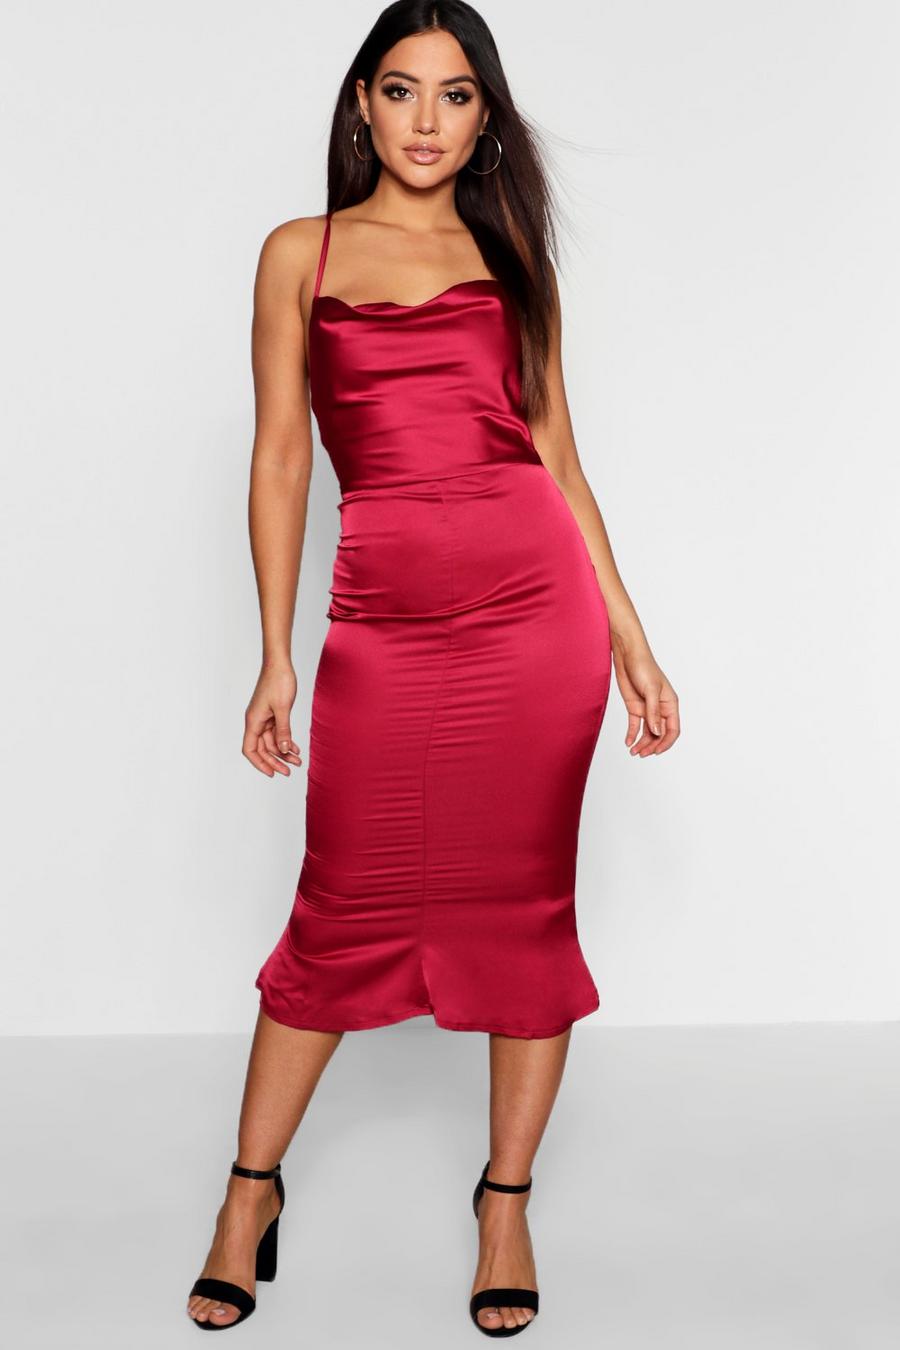 Berry red Satin Cowl Neck Lace Up Fish Tail Midi Dress